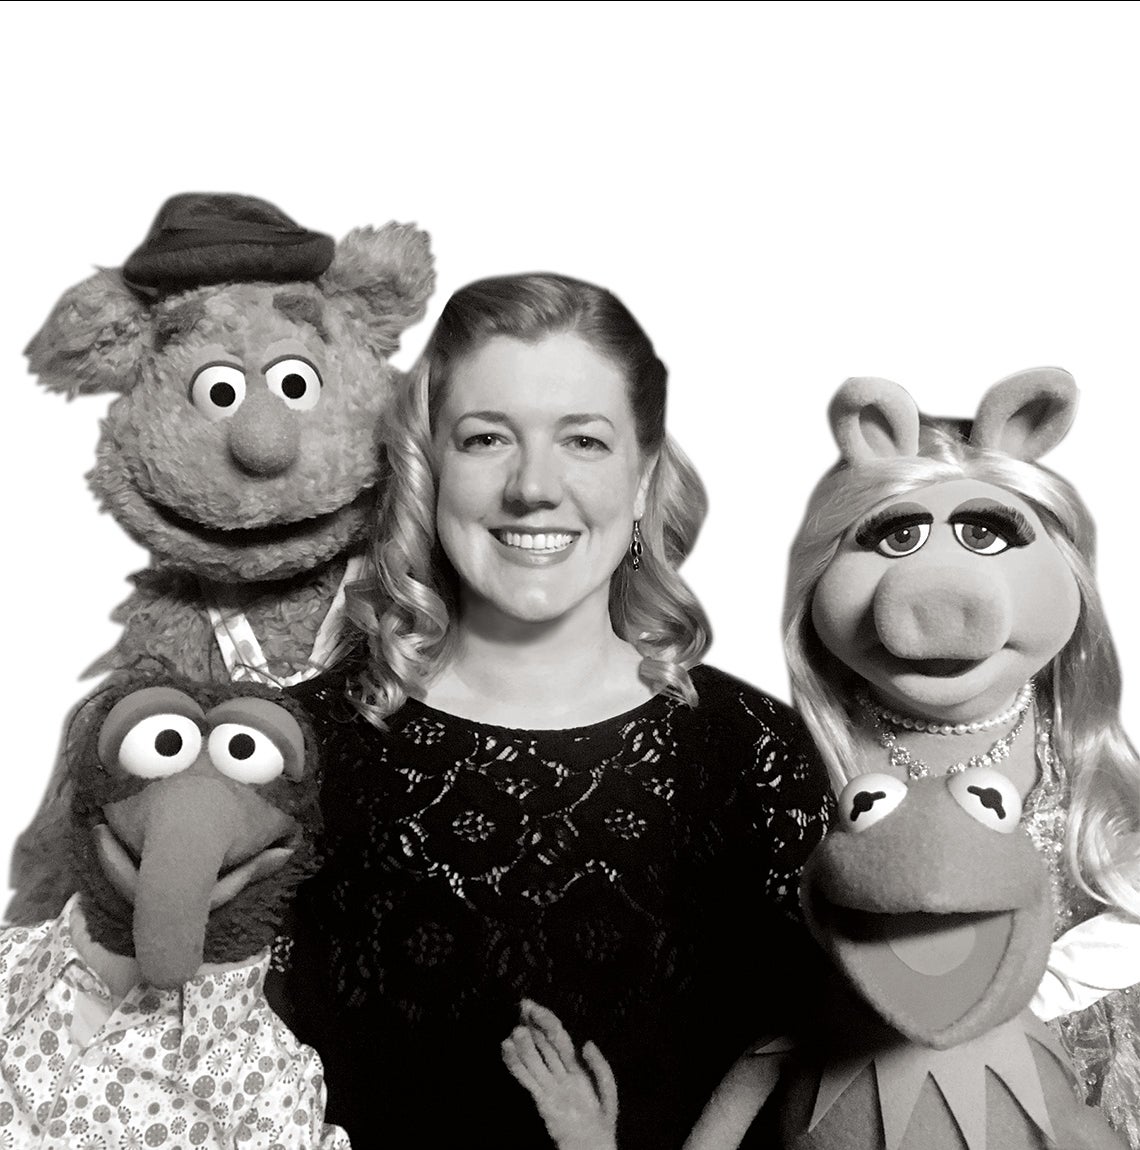 Darcy with four muppets